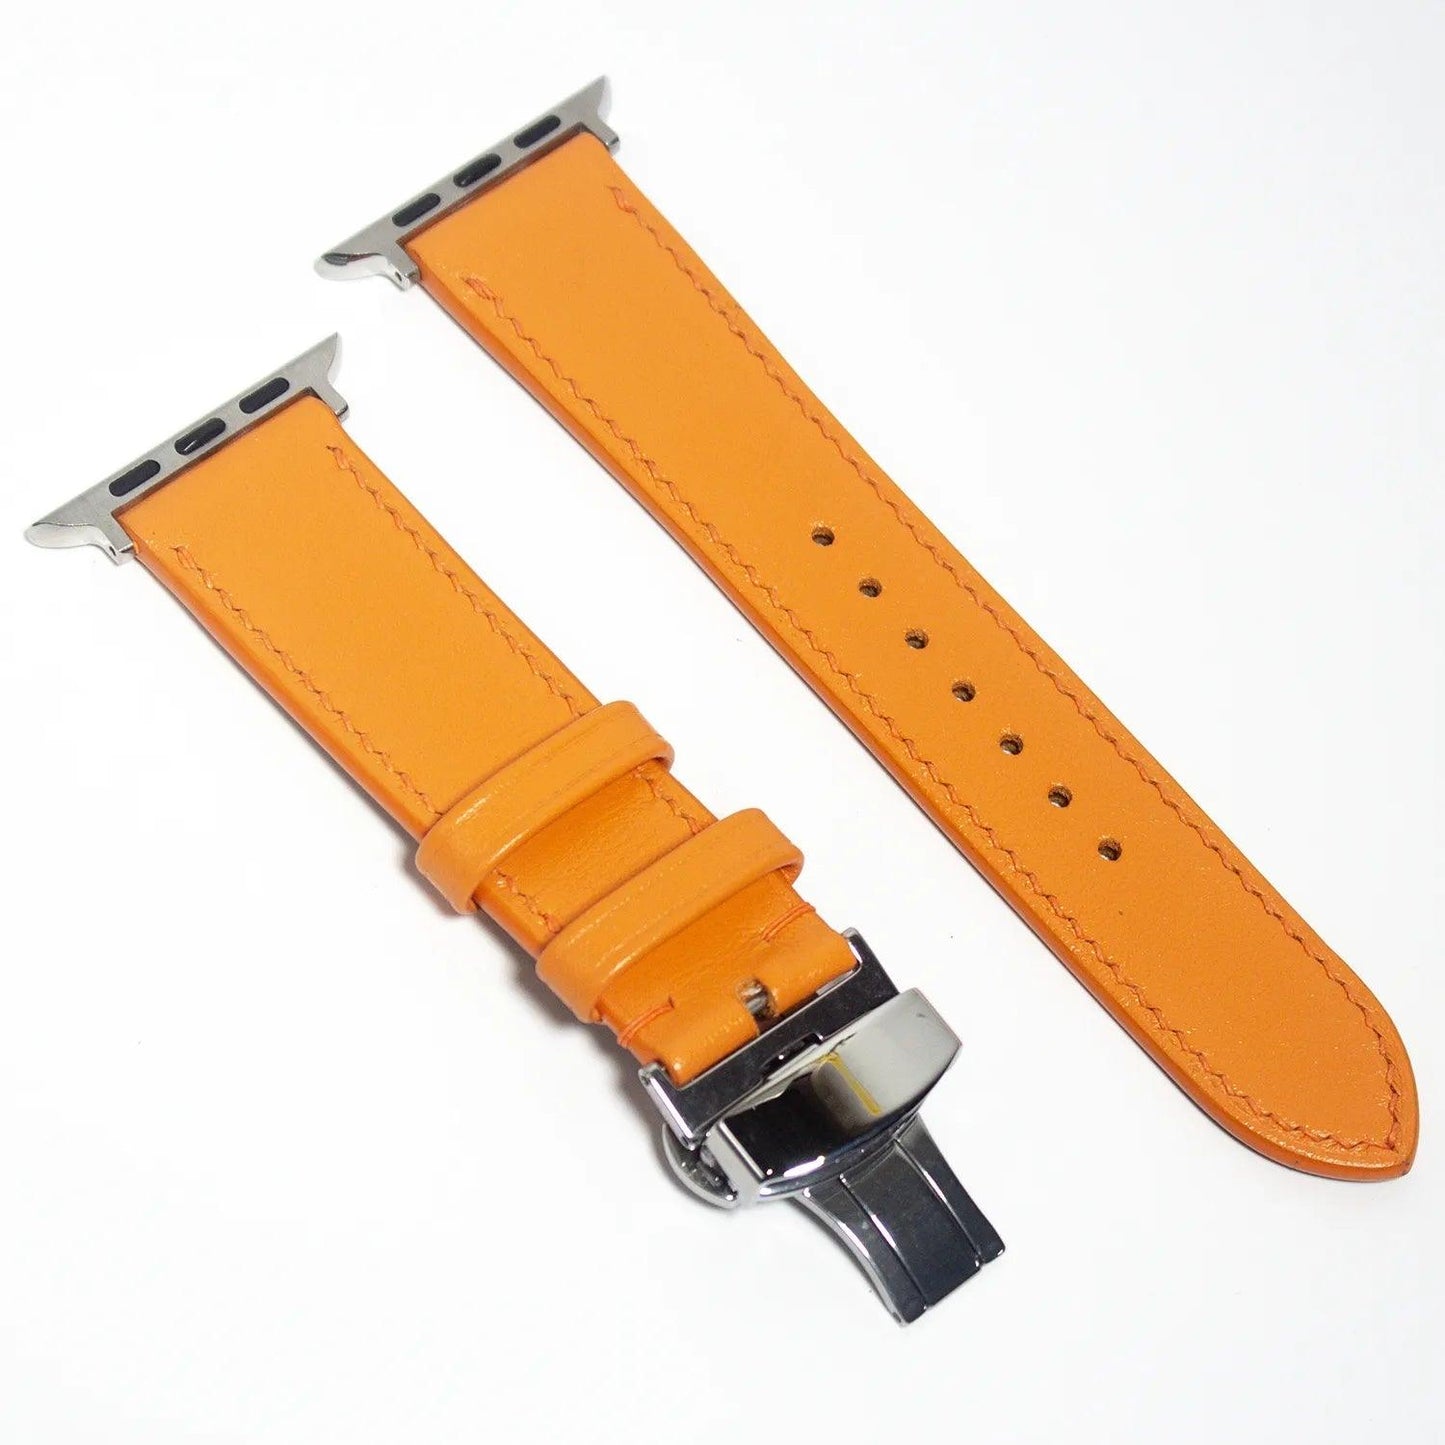 Upgrade your accessory game with this leather Apple Watch band in luxurious orange Swift leather, embodying elegance and vibrancy.